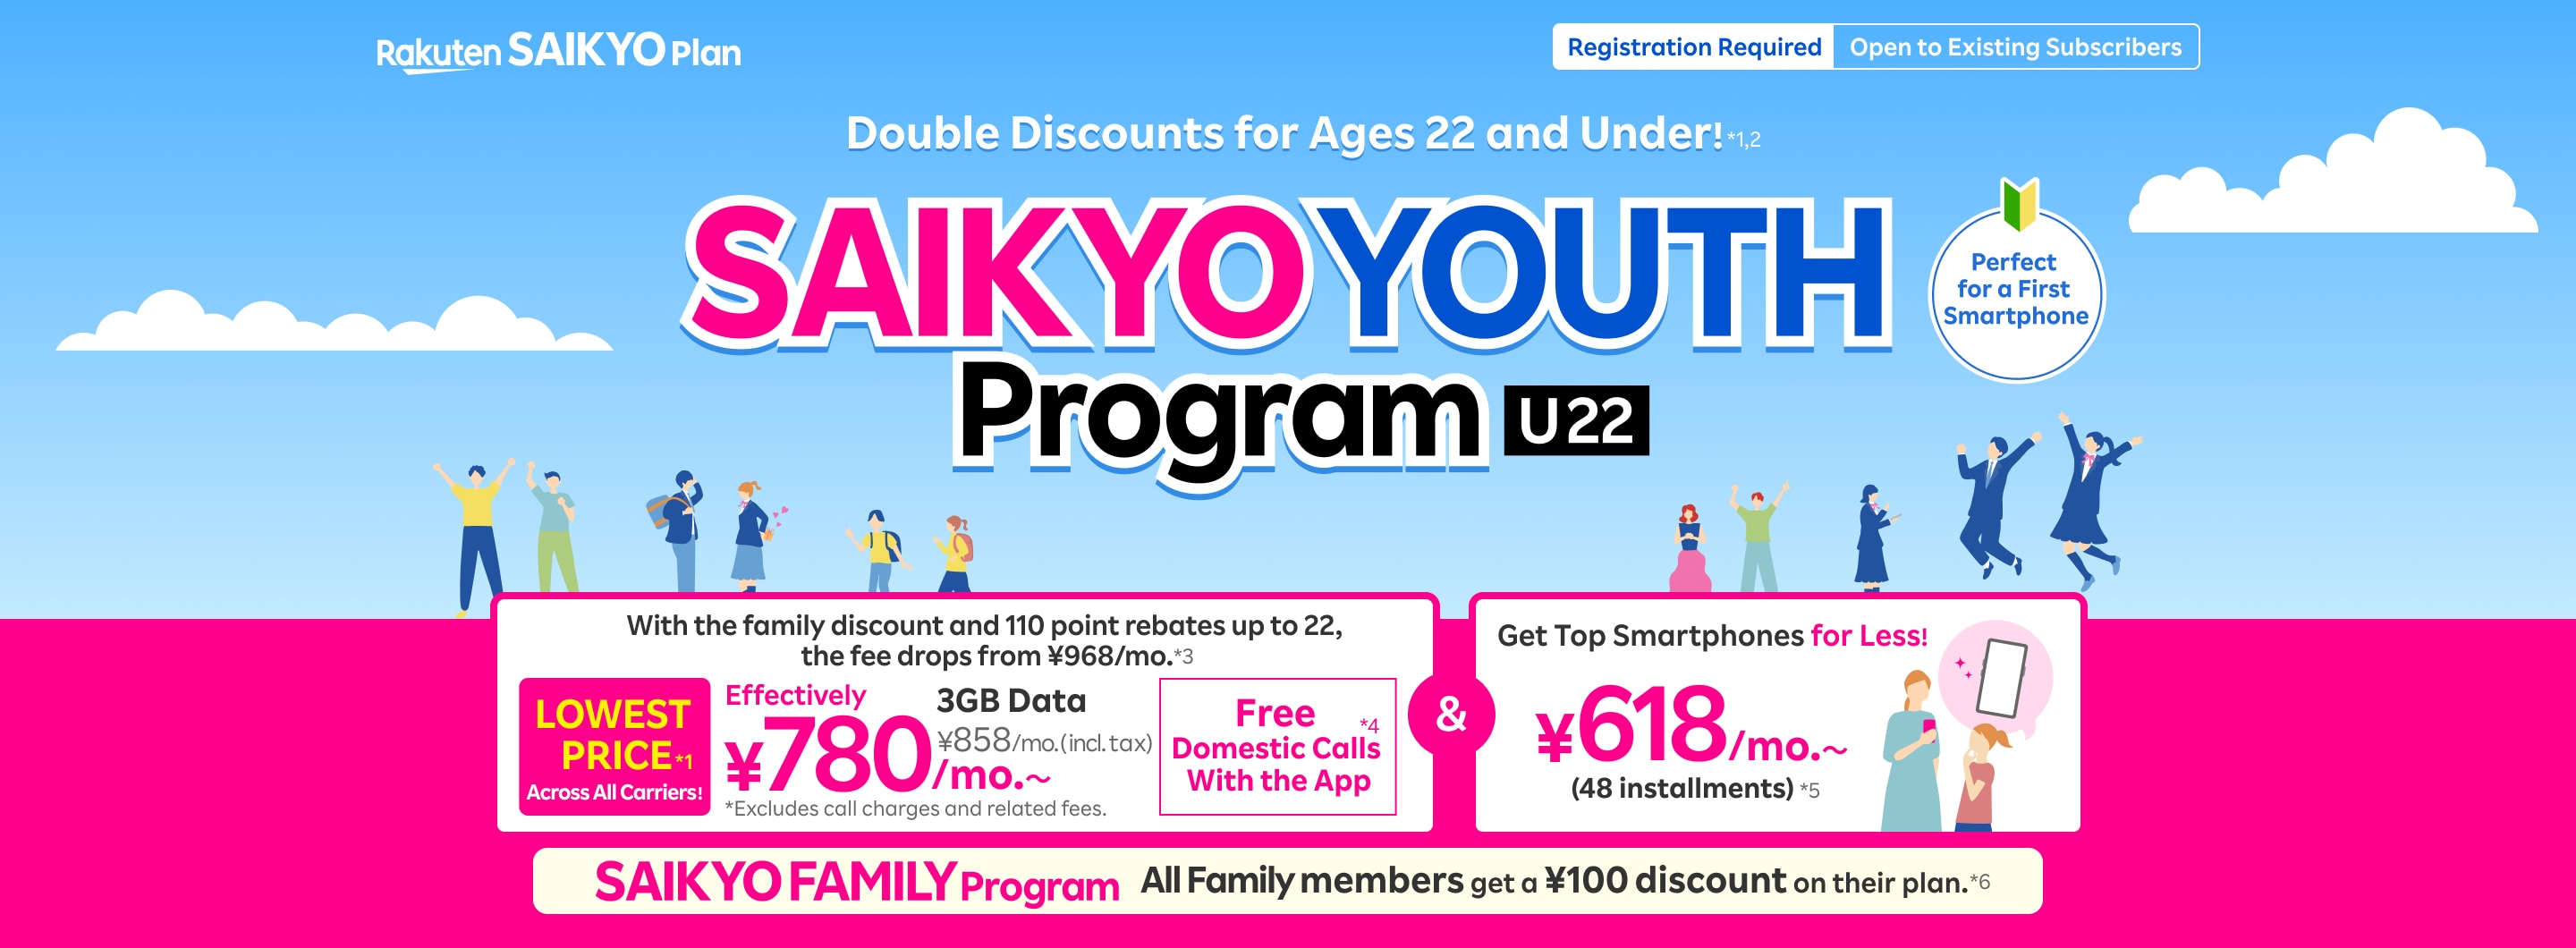 Double Discounts for Ages 22 and Under! SAIKYO YOUTH Program